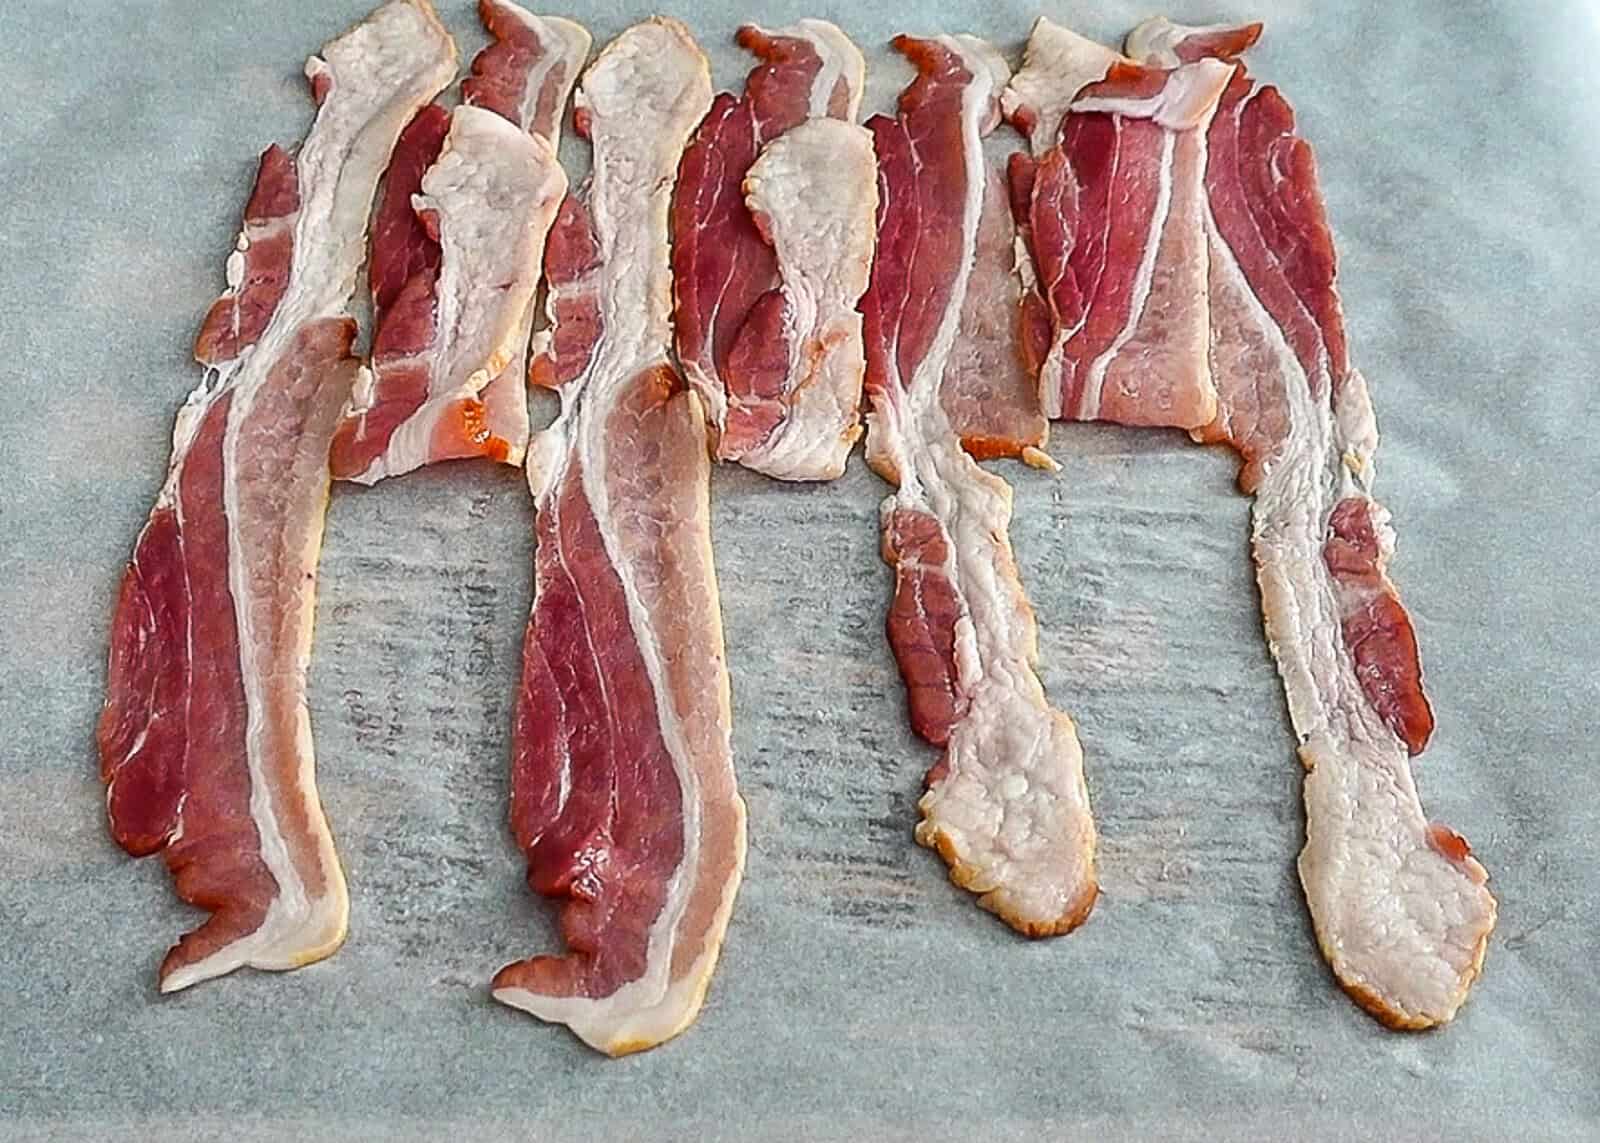 Bacon Weave Technique demonstration with folded pieces of bacon